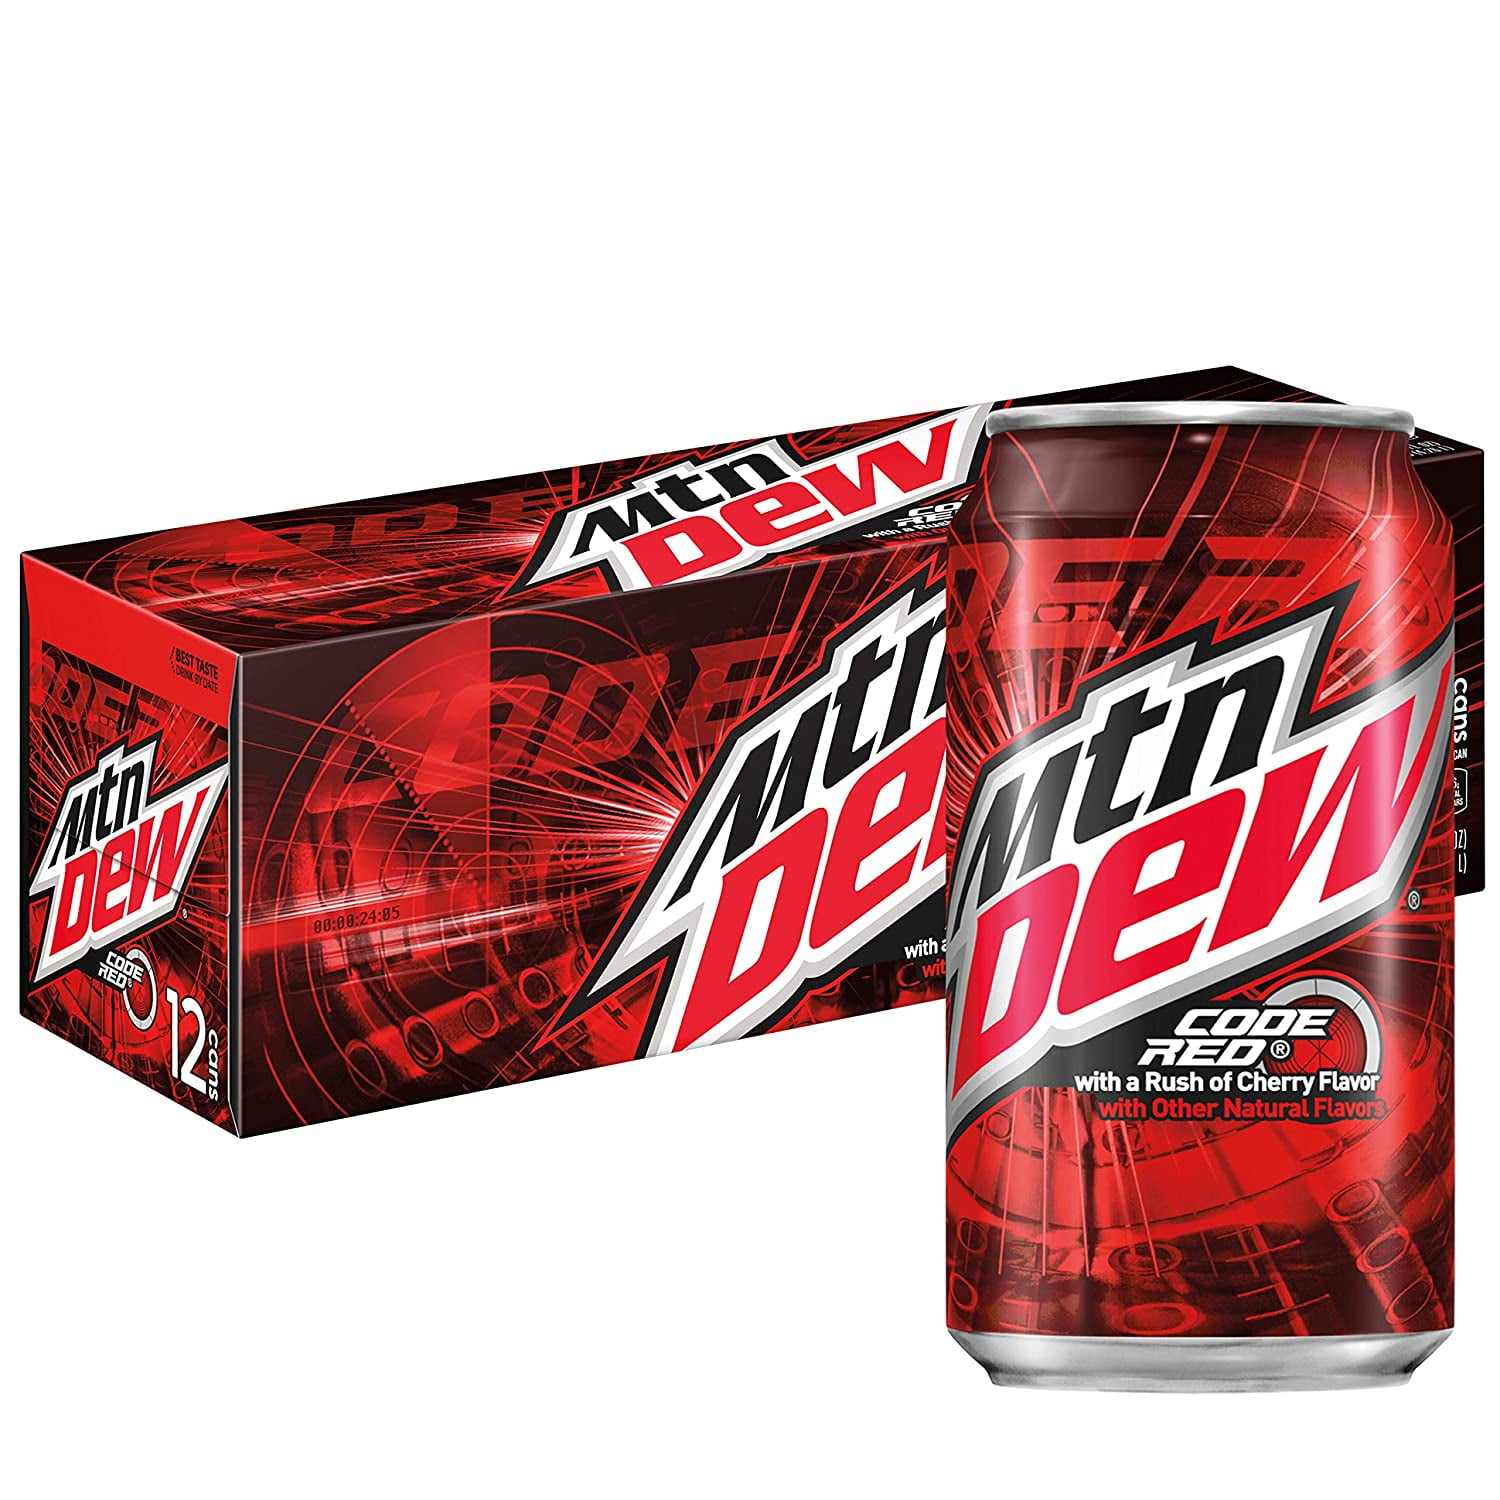 Mountain Dew Code Red Cherry Flavored Soda Pop Fl Oz Pack Cans